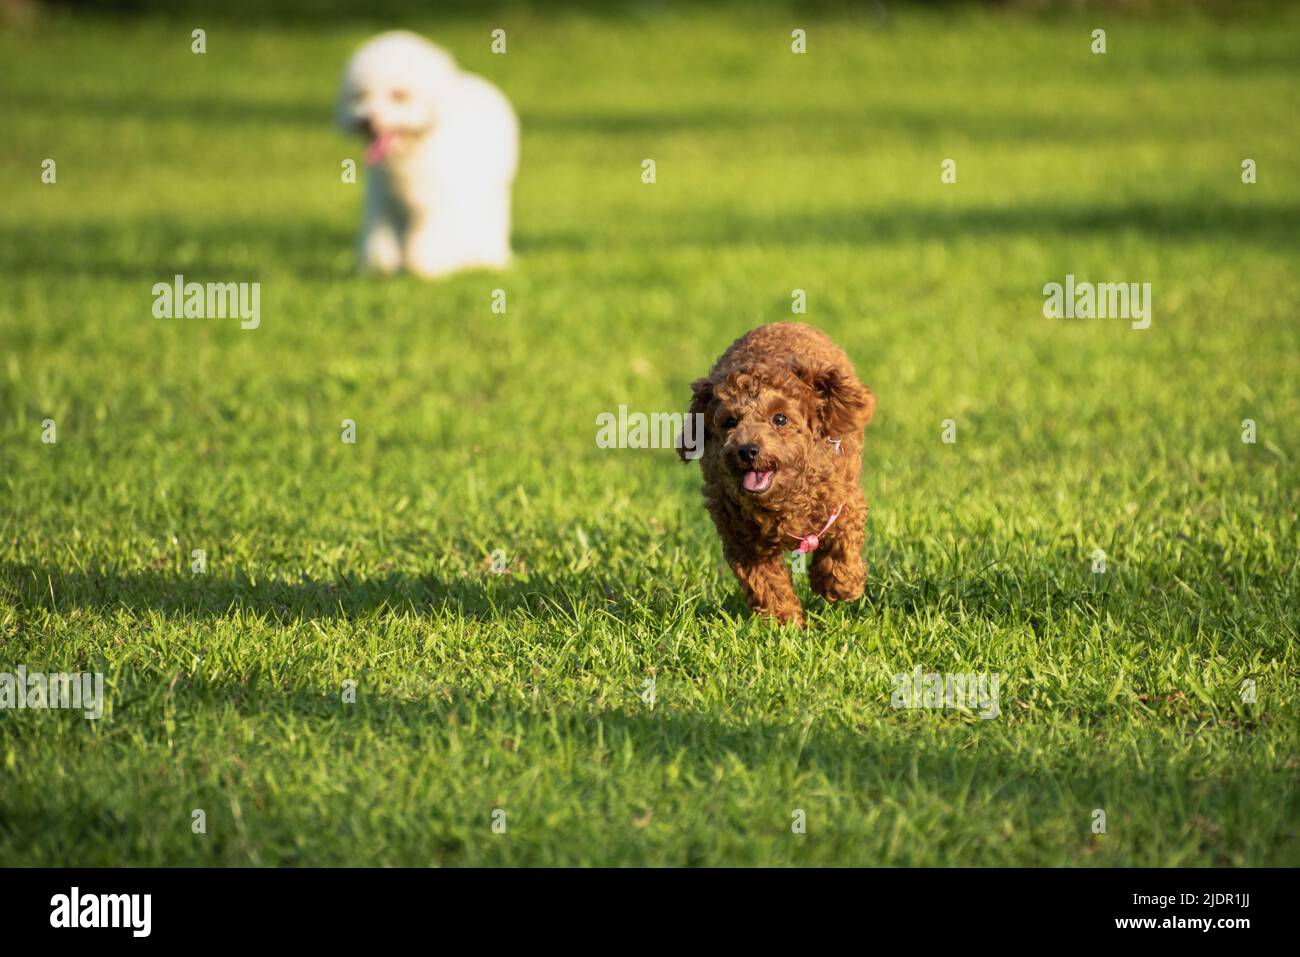 Puppy running in the grass Stock Photo